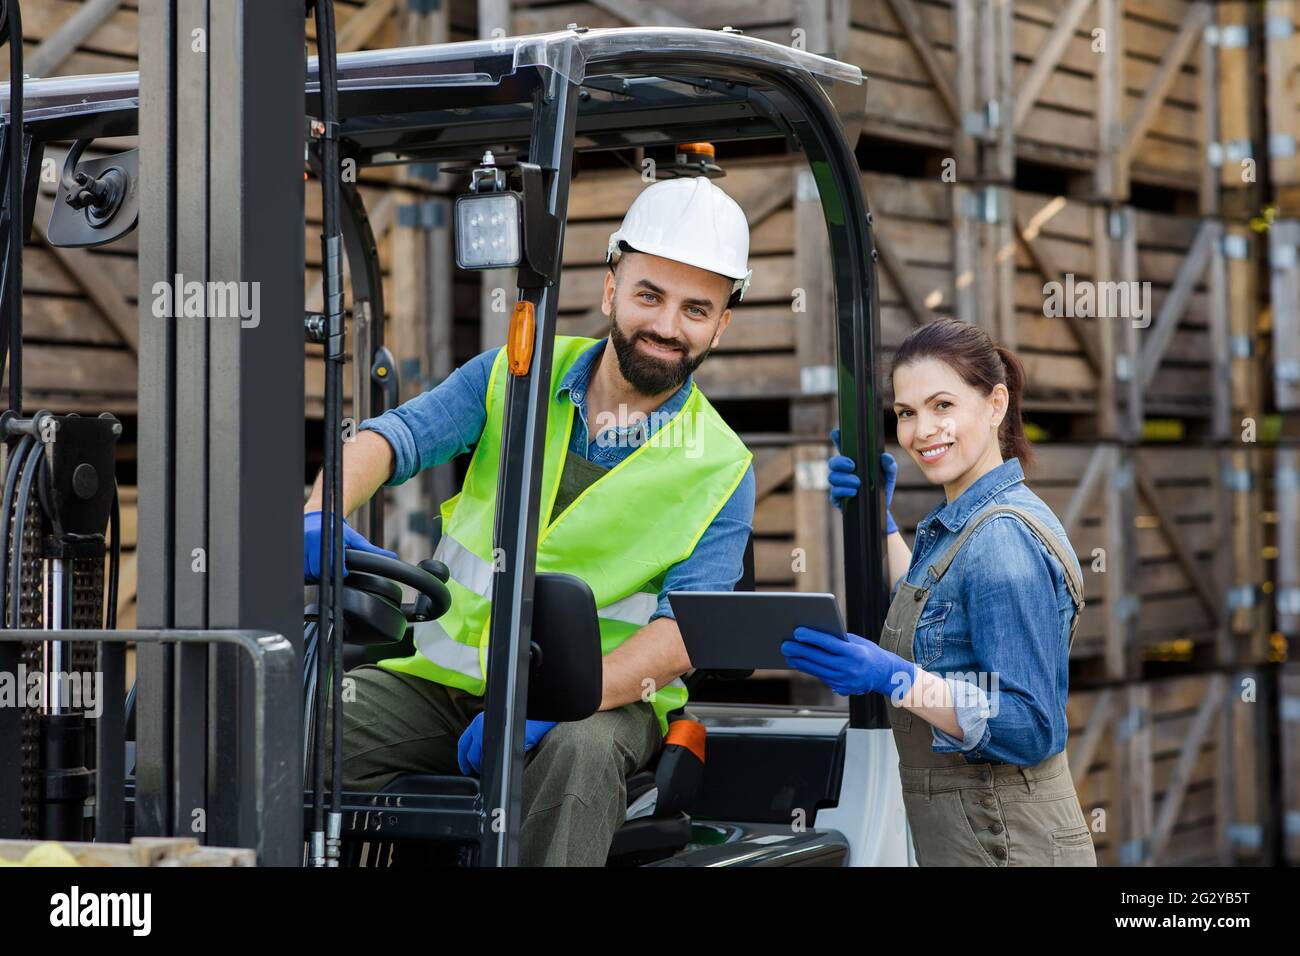 Warehouse workers, industry management with modern technology Stock Photo